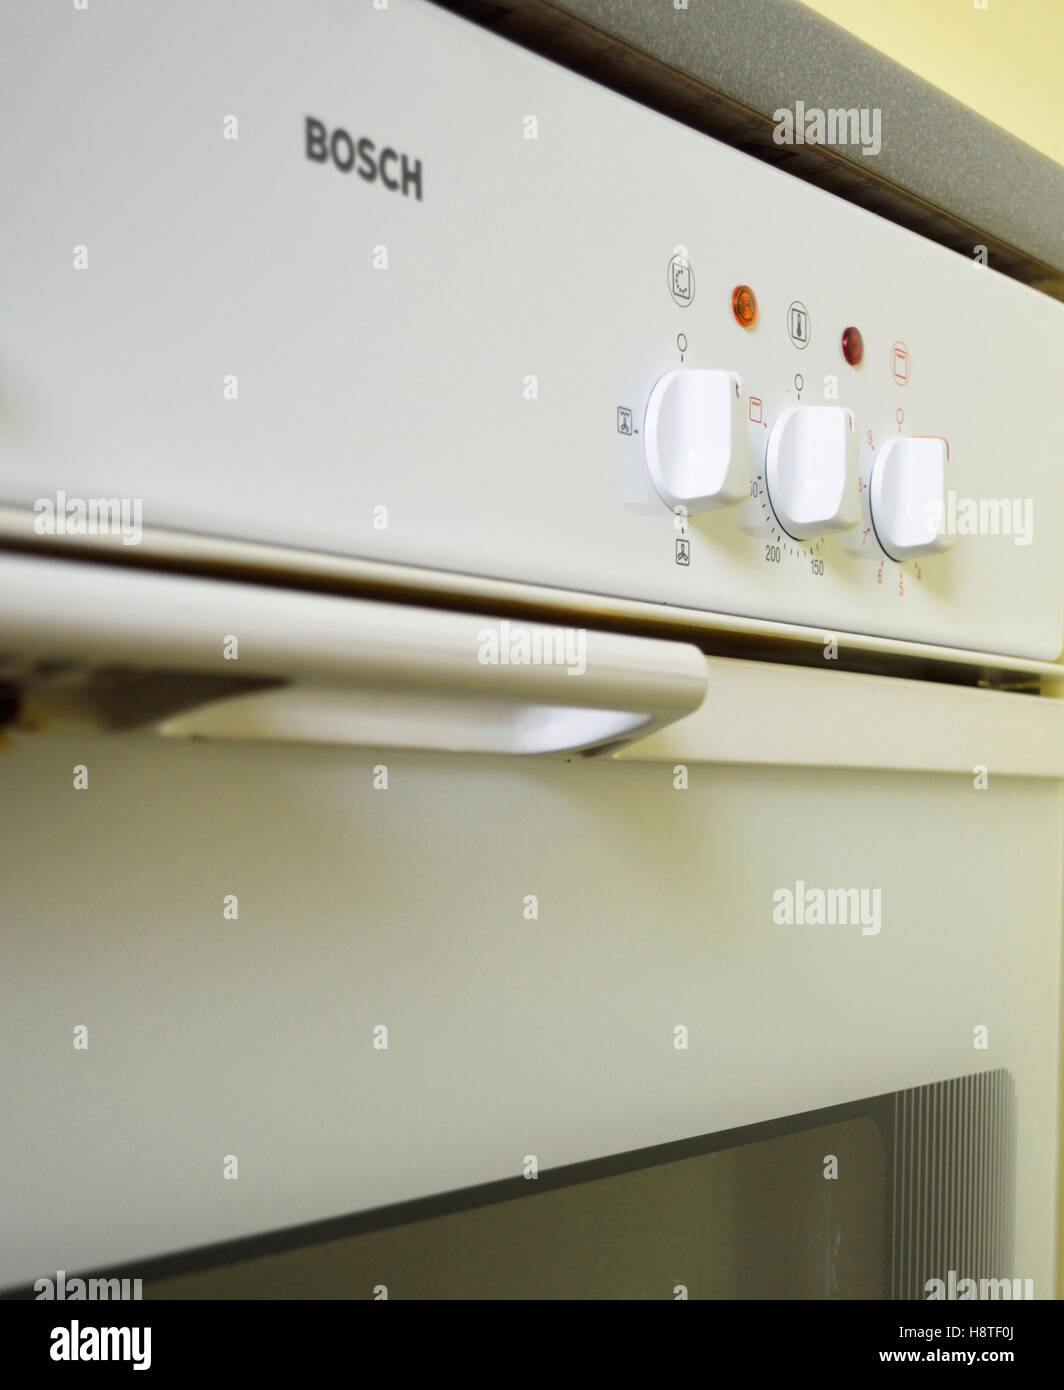 Old white Bosch oven built in the 1980s. Stock Photo